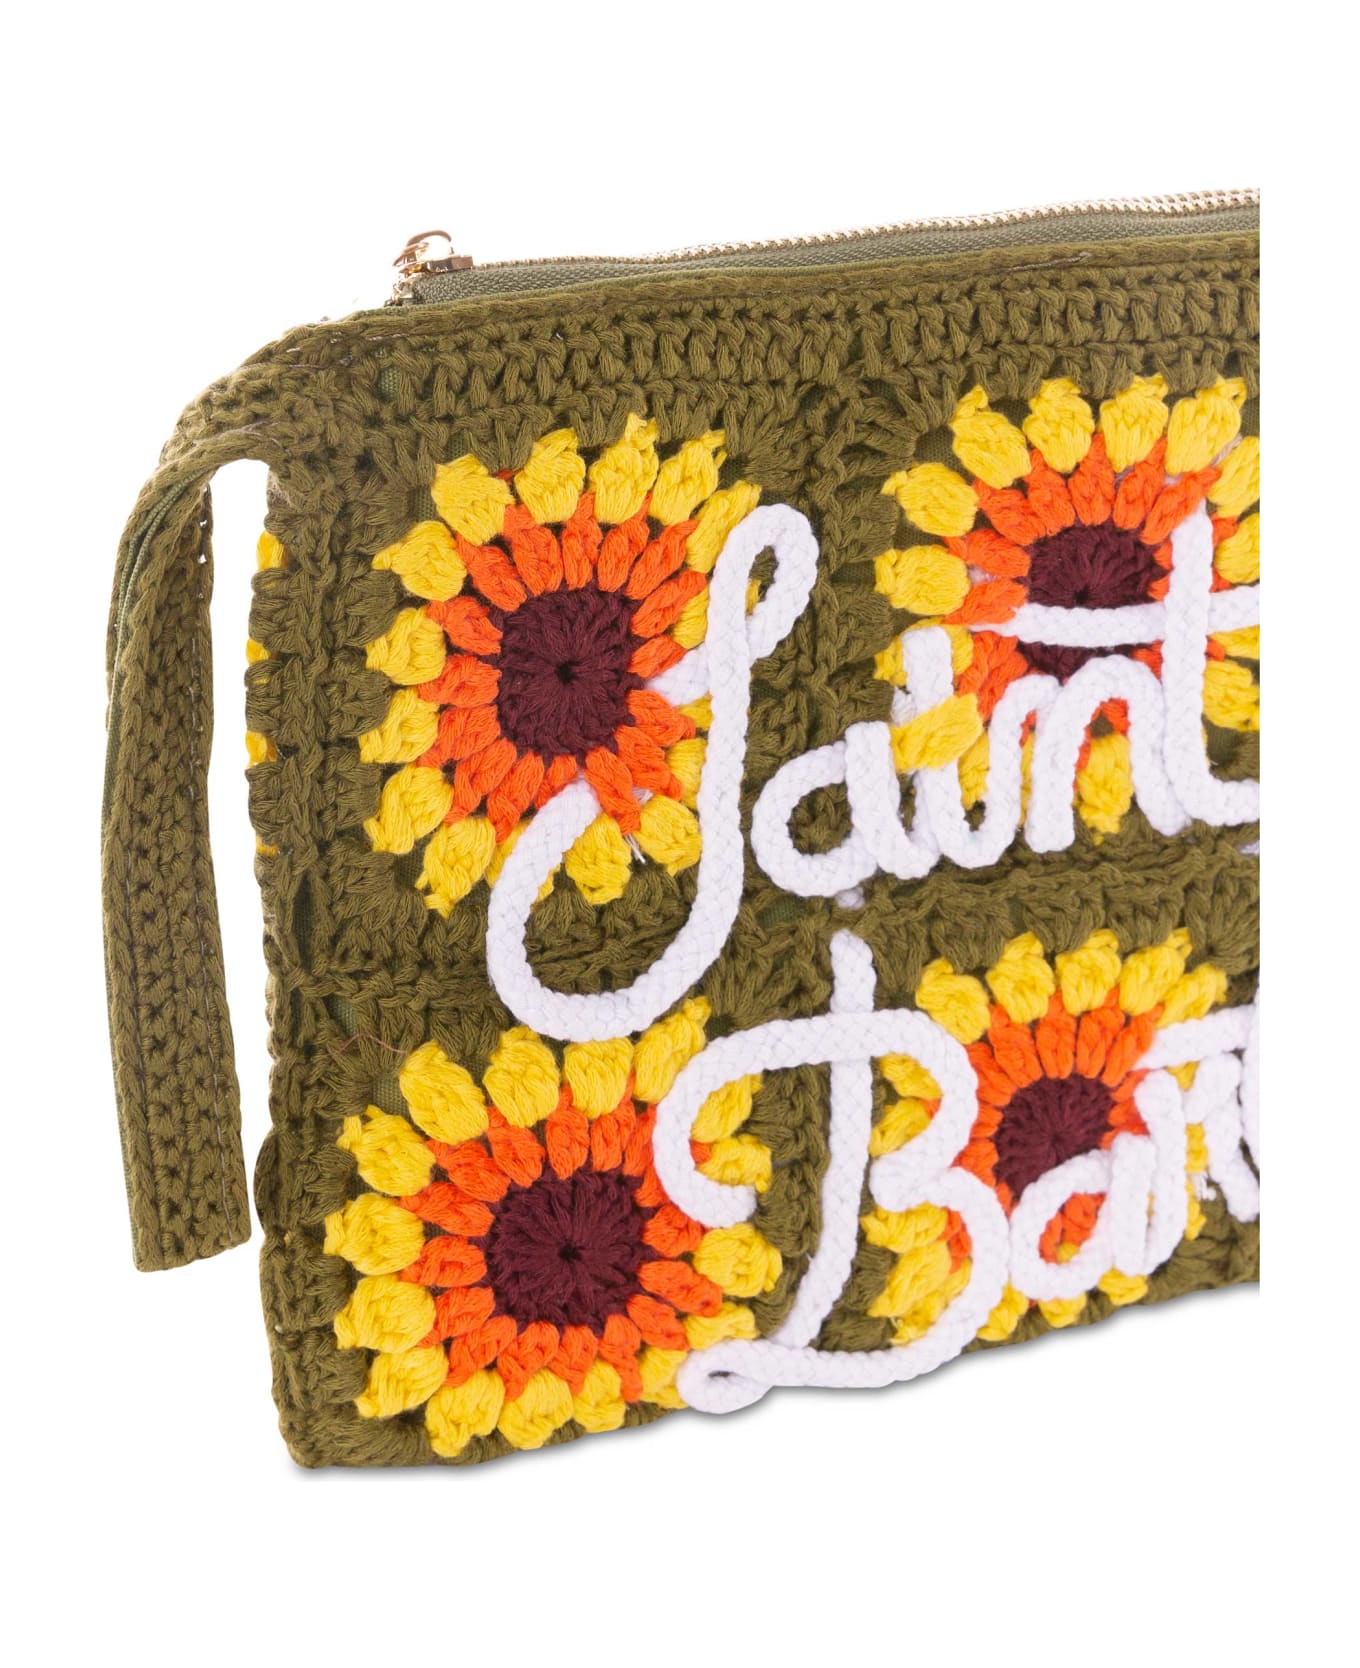 MC2 Saint Barth Parisienne Crochet Pouch Bag With Sunflower Embroidery - GREEN トラベルバッグ